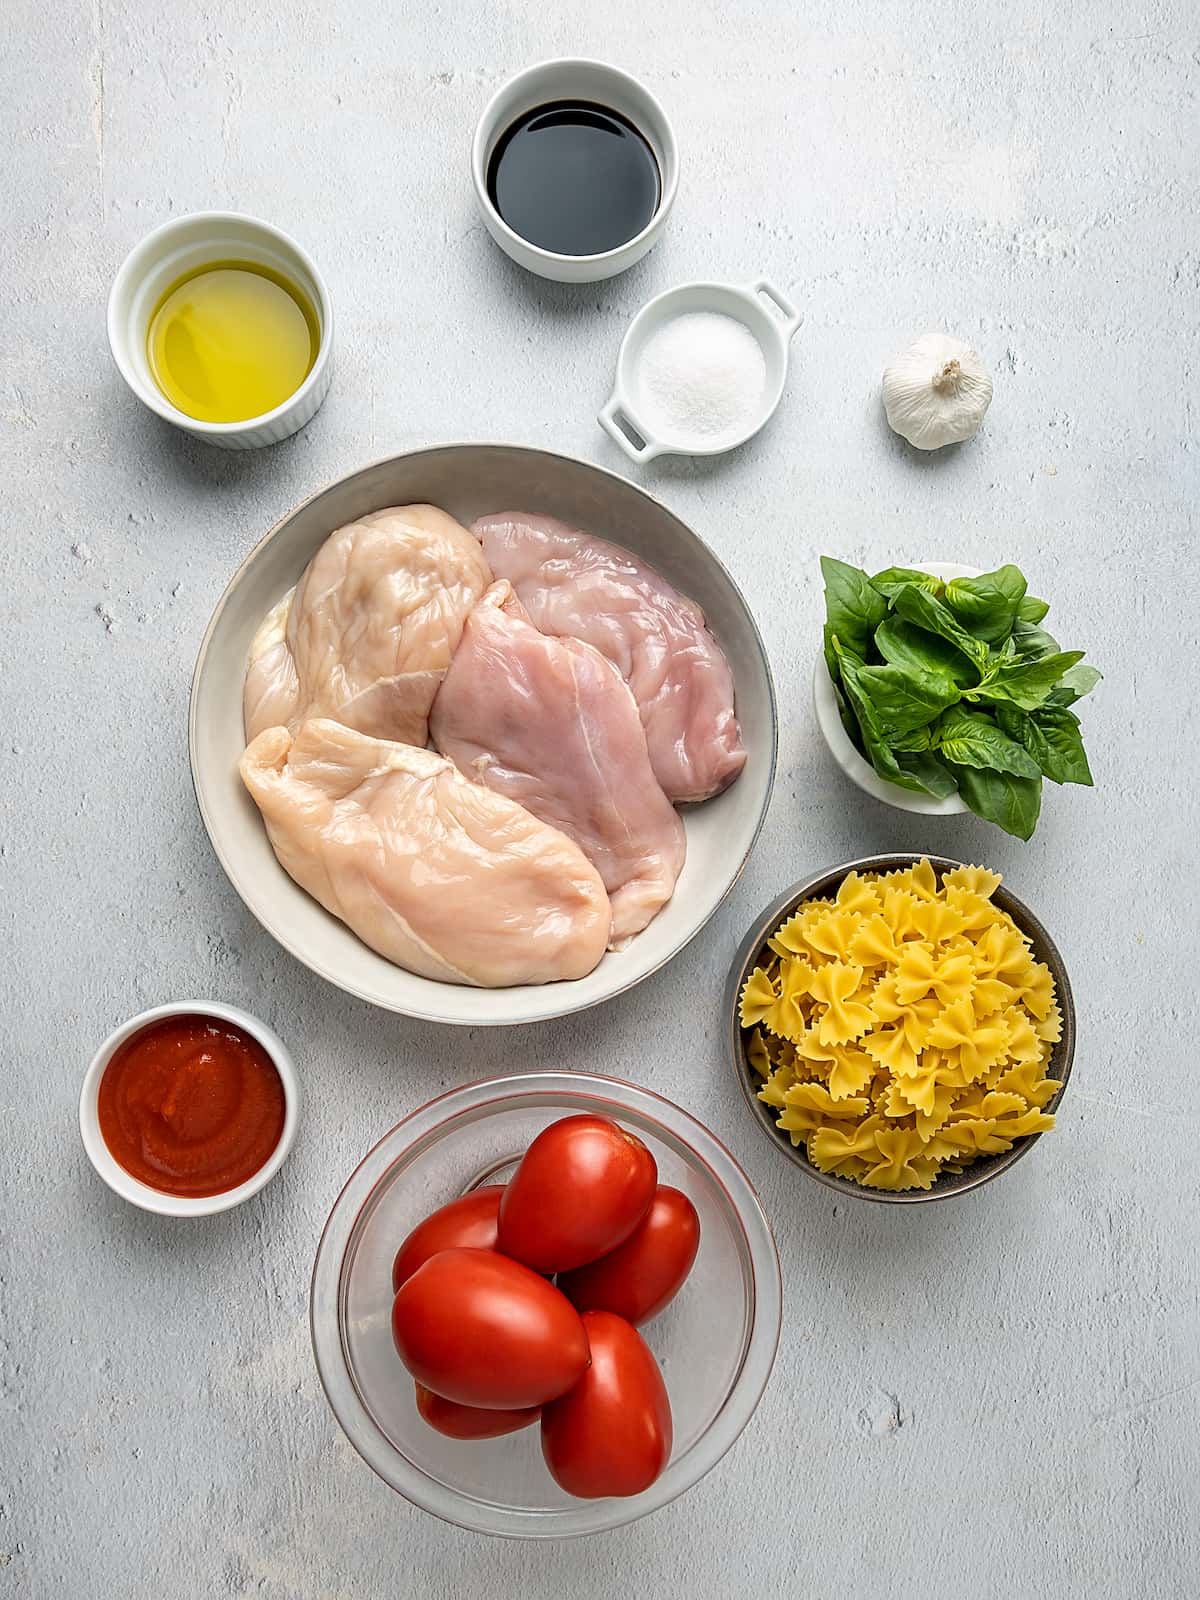 The ingredients for Chicken Bruschetta Pasta laid out in bowls on the counter.